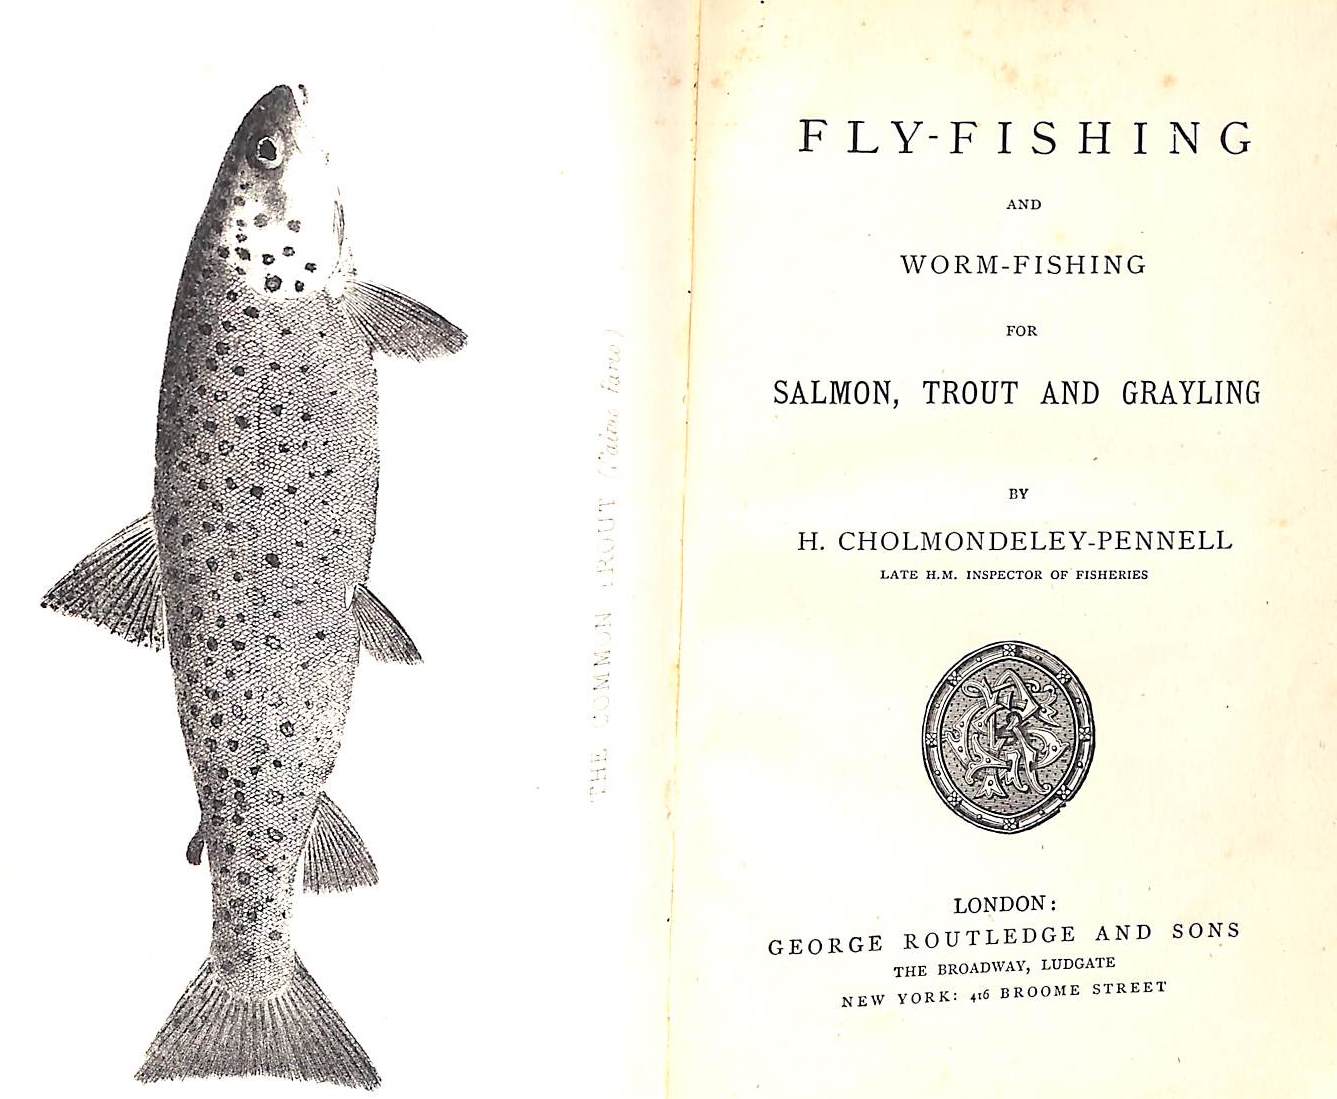 Fly-Fishing And Worm-Fishing For Salmon, Trout And Grayling 1886 CHO